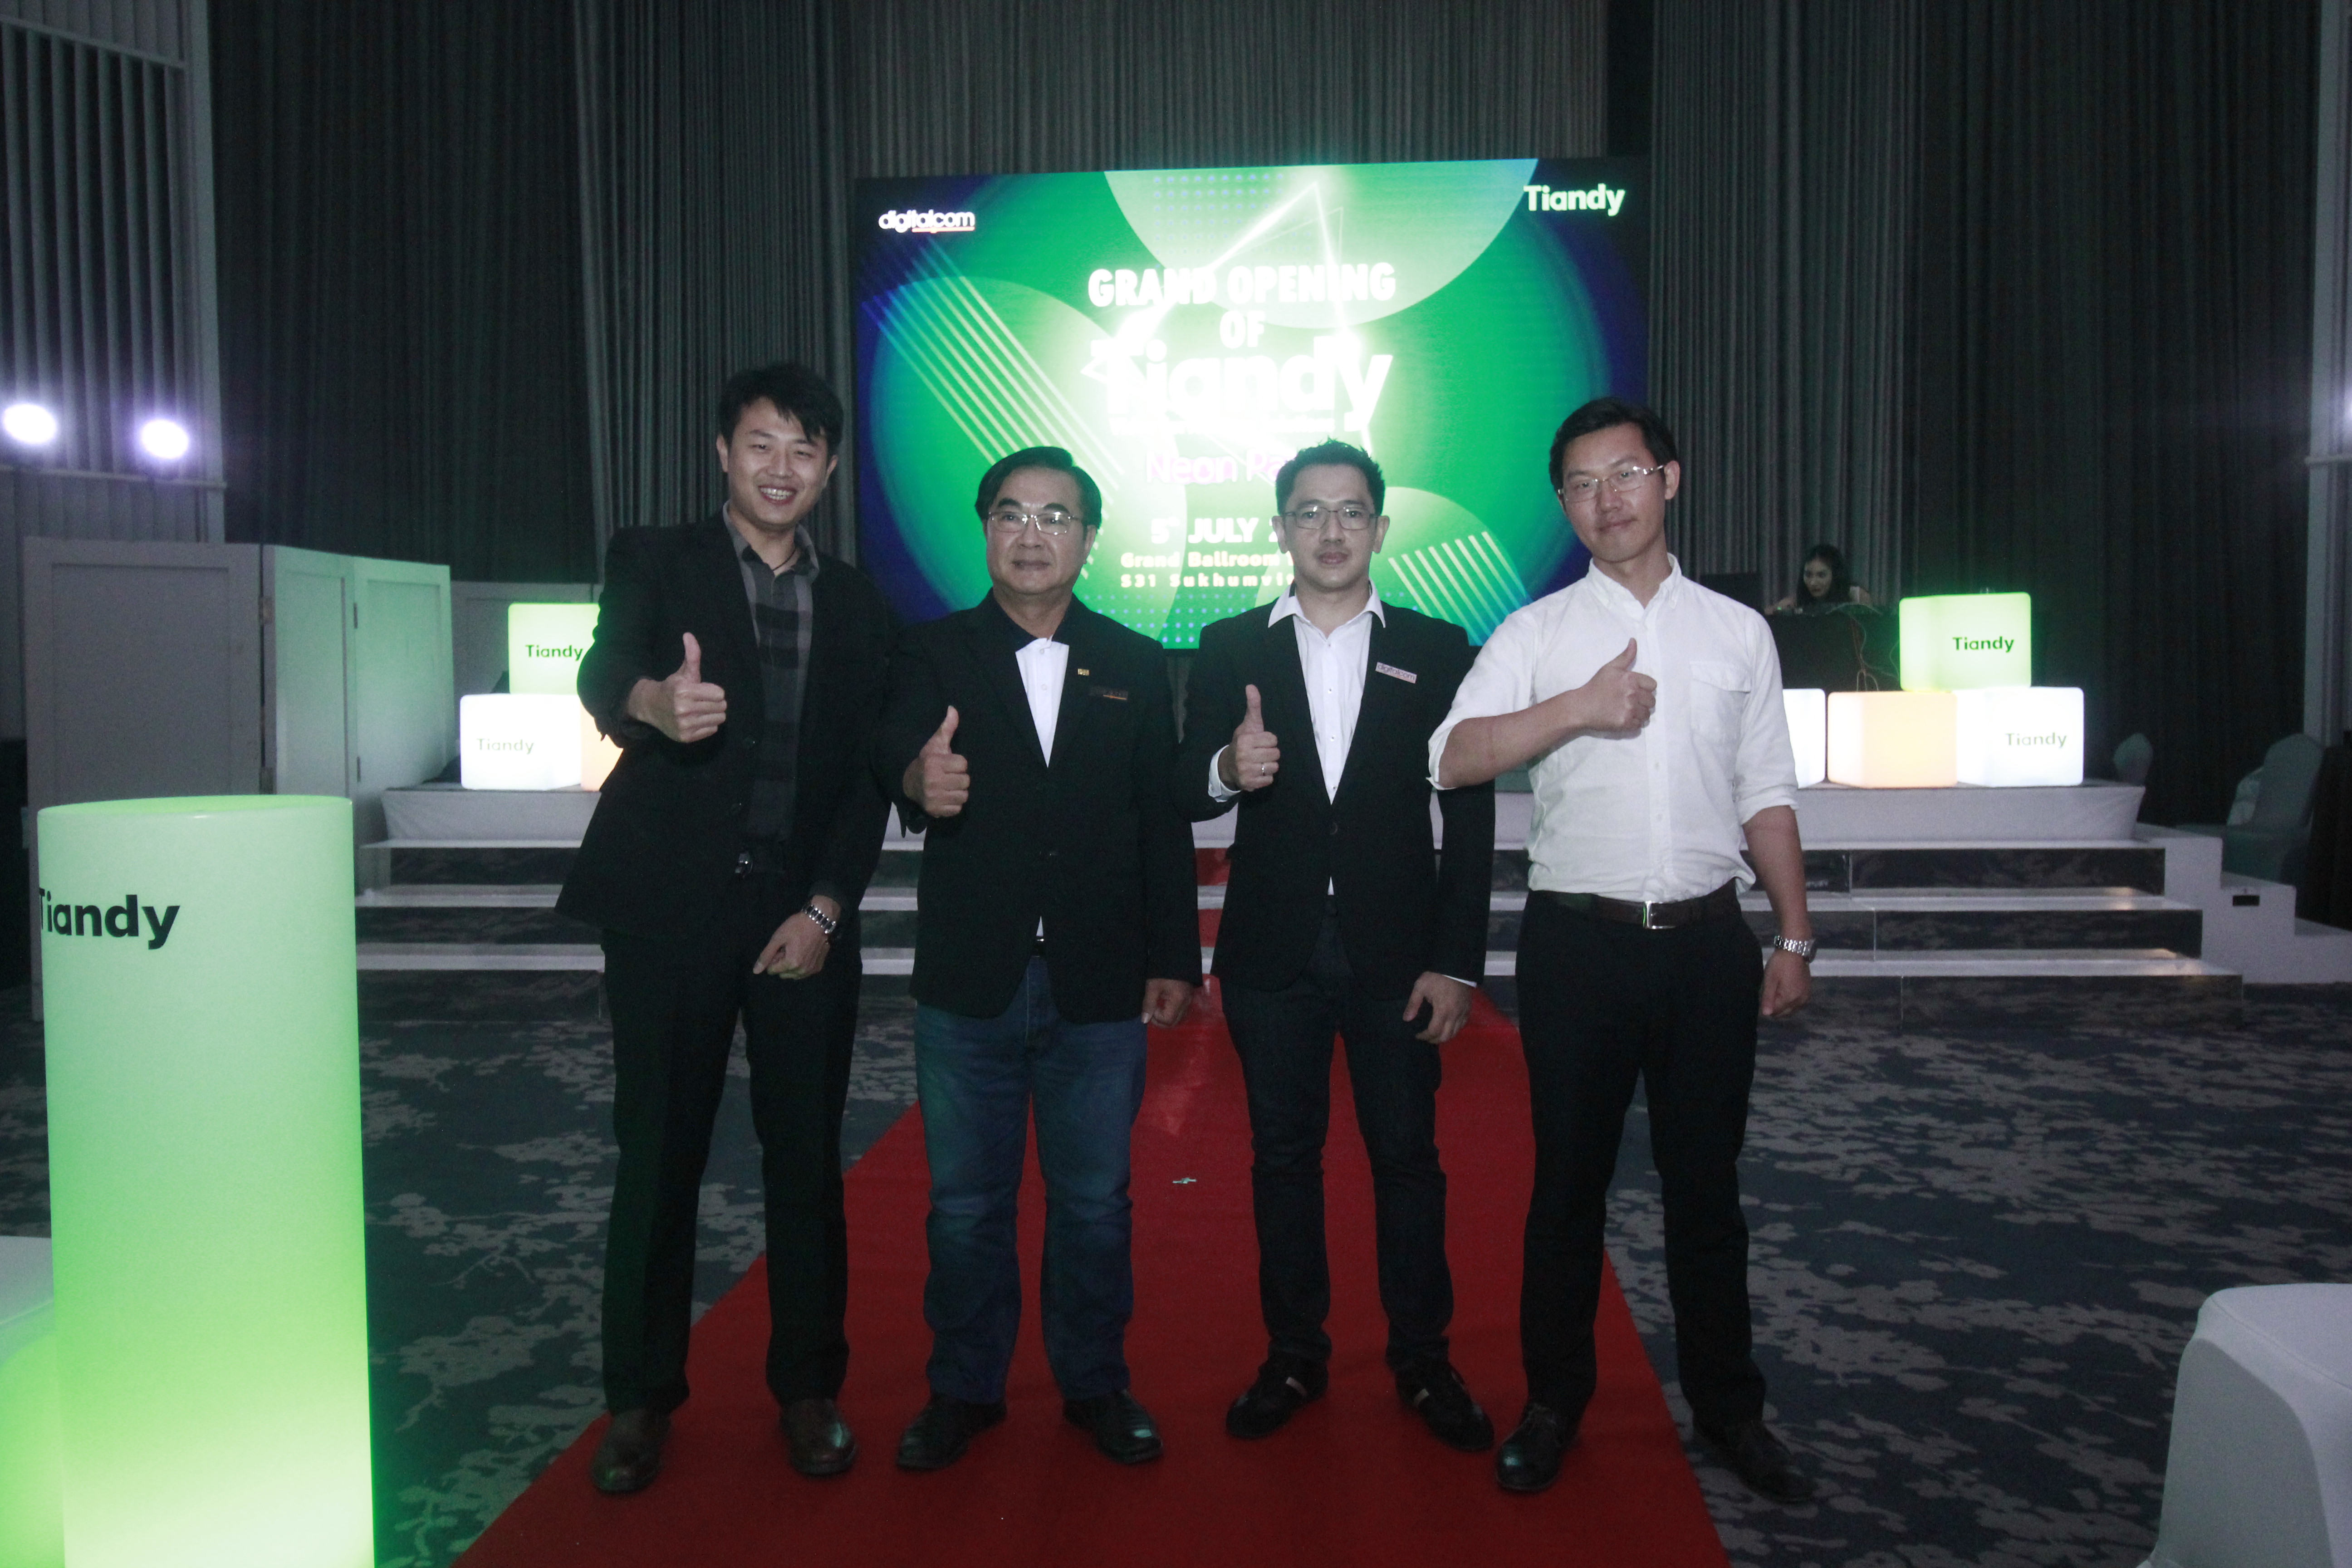 Grand Opening of Tiandy : Video Suveillance Solution